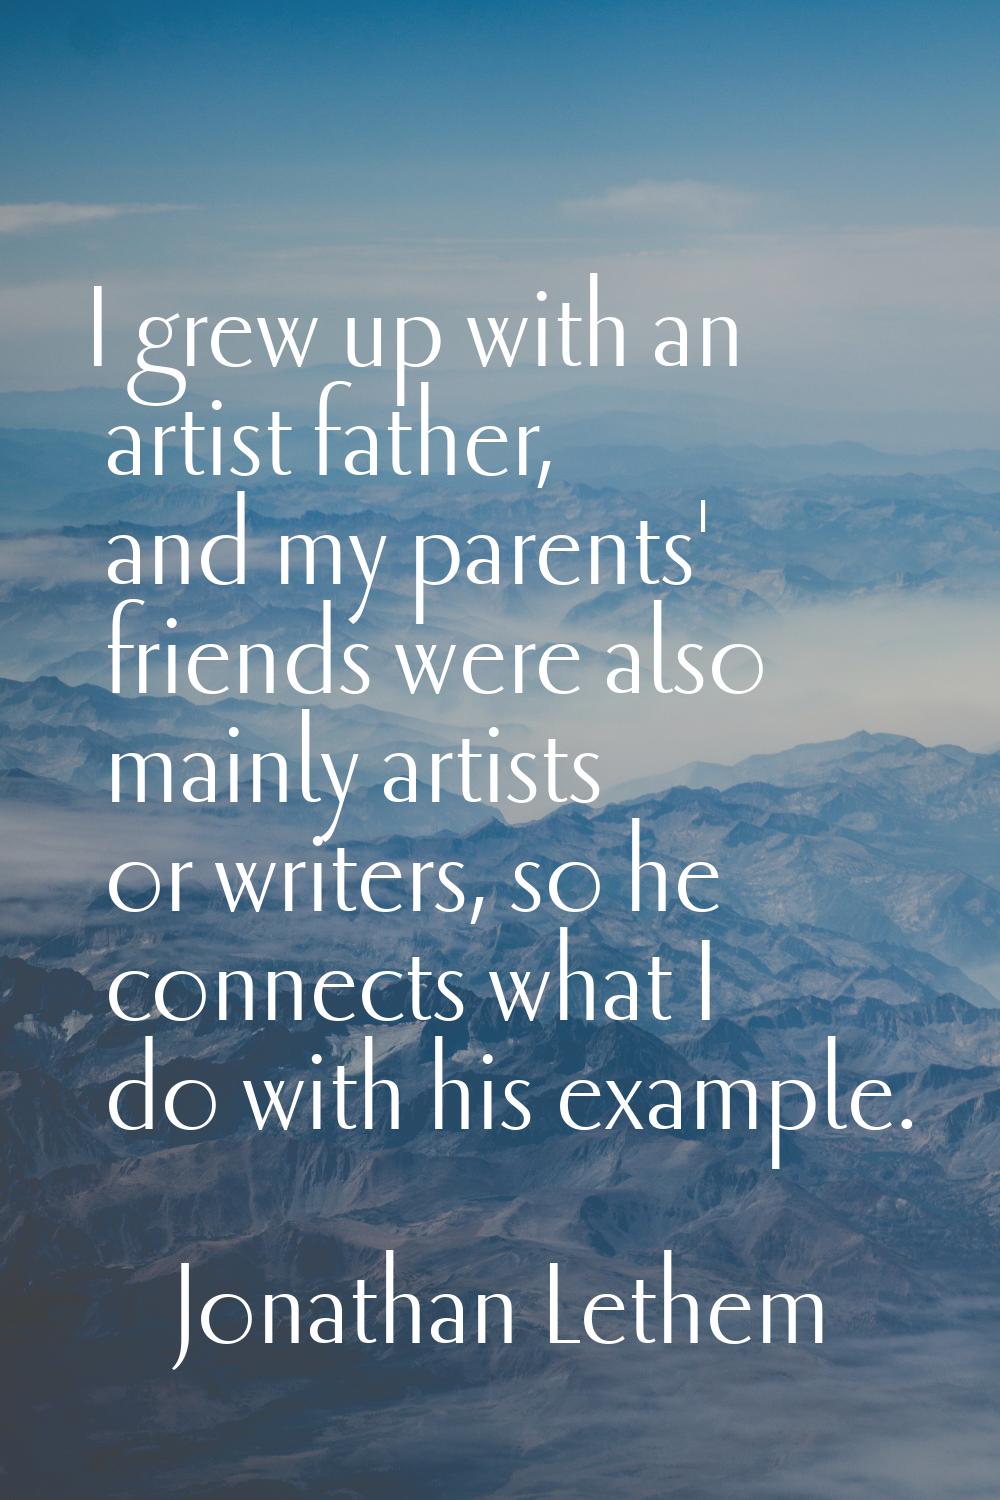 I grew up with an artist father, and my parents' friends were also mainly artists or writers, so he